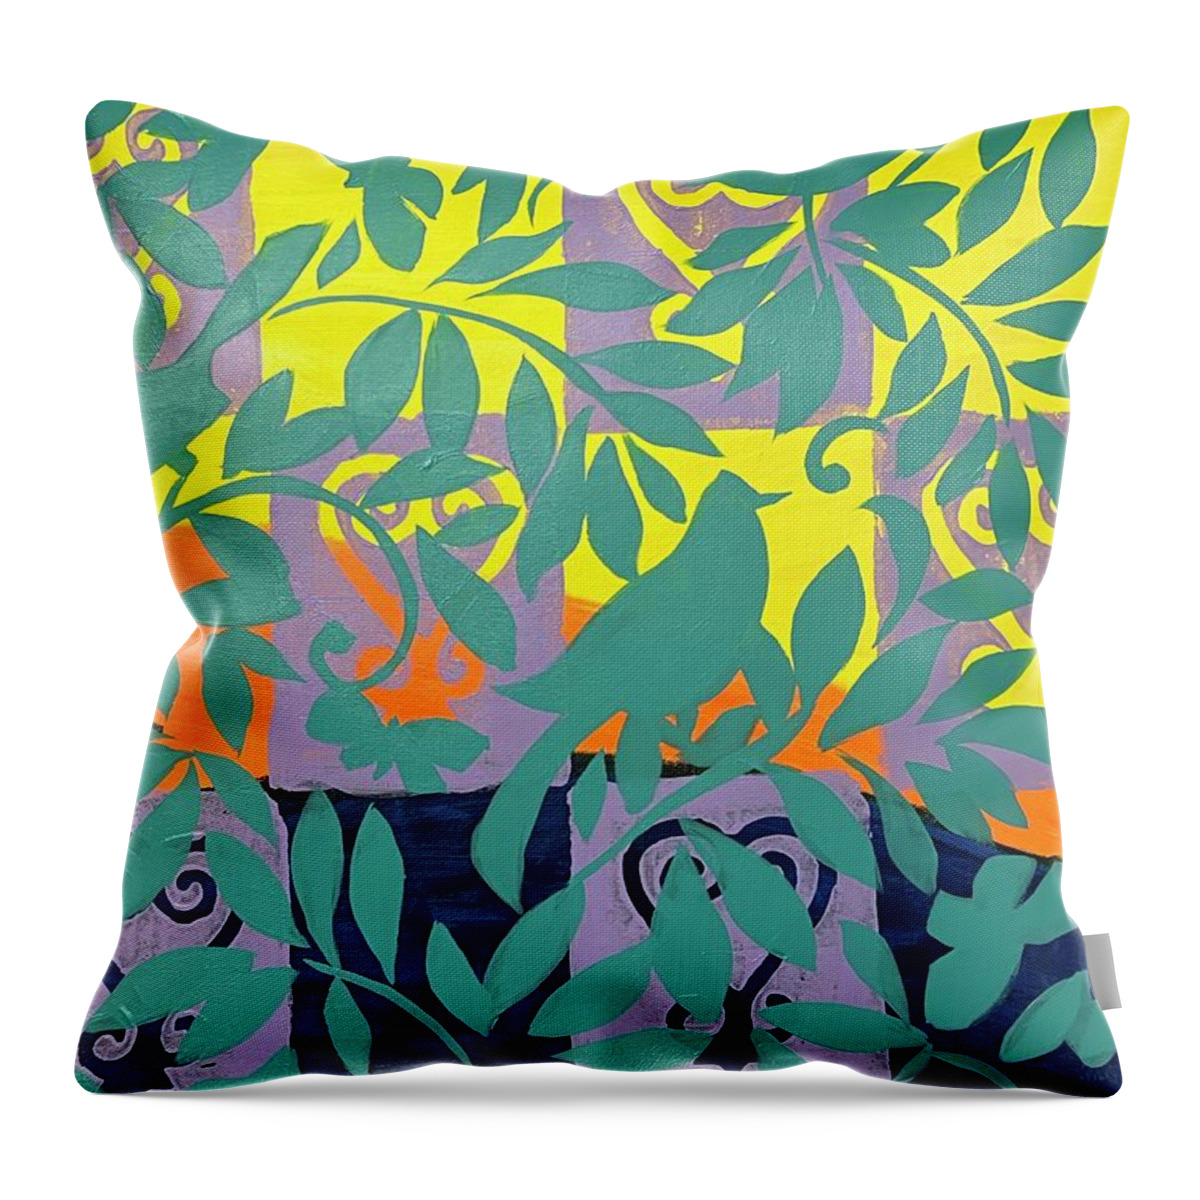  Throw Pillow featuring the painting Turquoise by Clayton Singleton